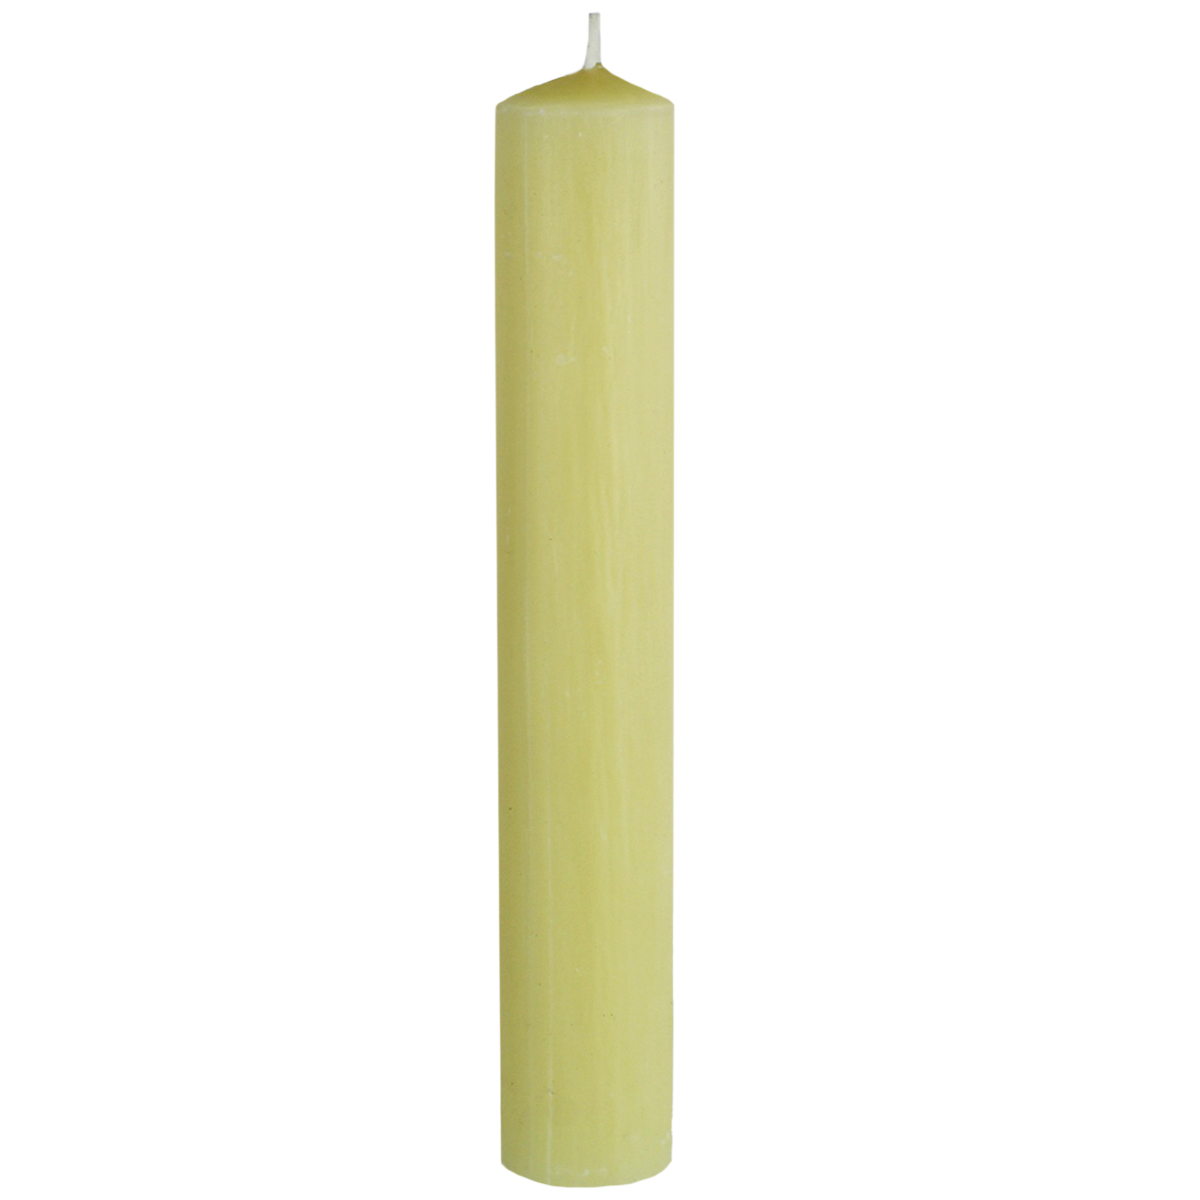 General Wax & Candle  100% BEESWAX CANDLE STICKS 2 x 18 GROOVE BASE (Box  of 4) - General Wax & Candle